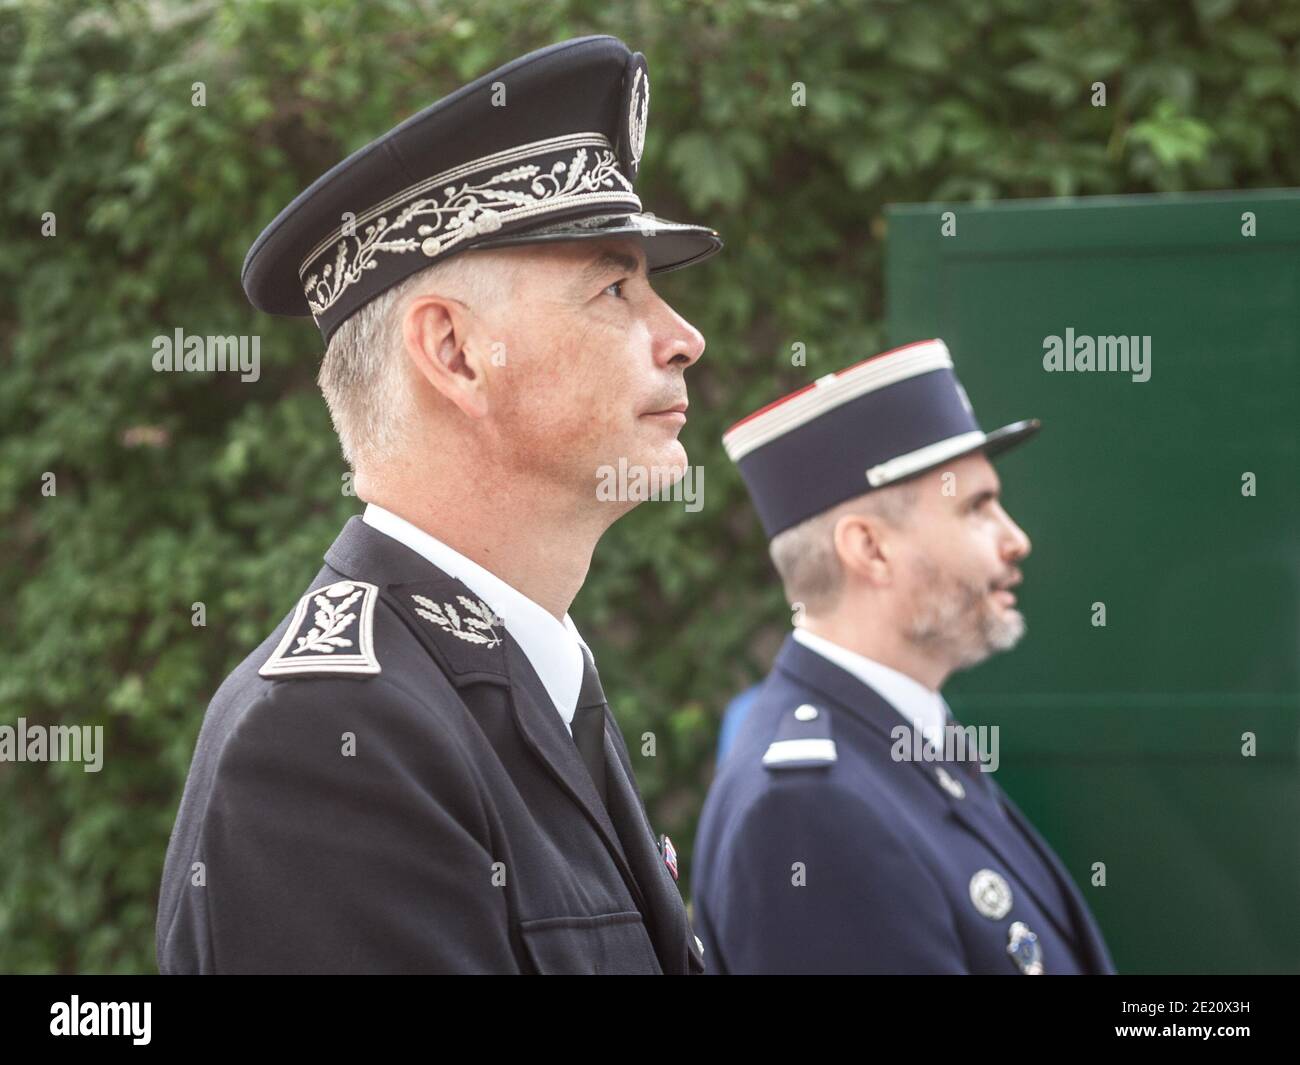 PARIS, FRANCE - JULY 12, 2019: Commissaire divisionnaire of the French ...